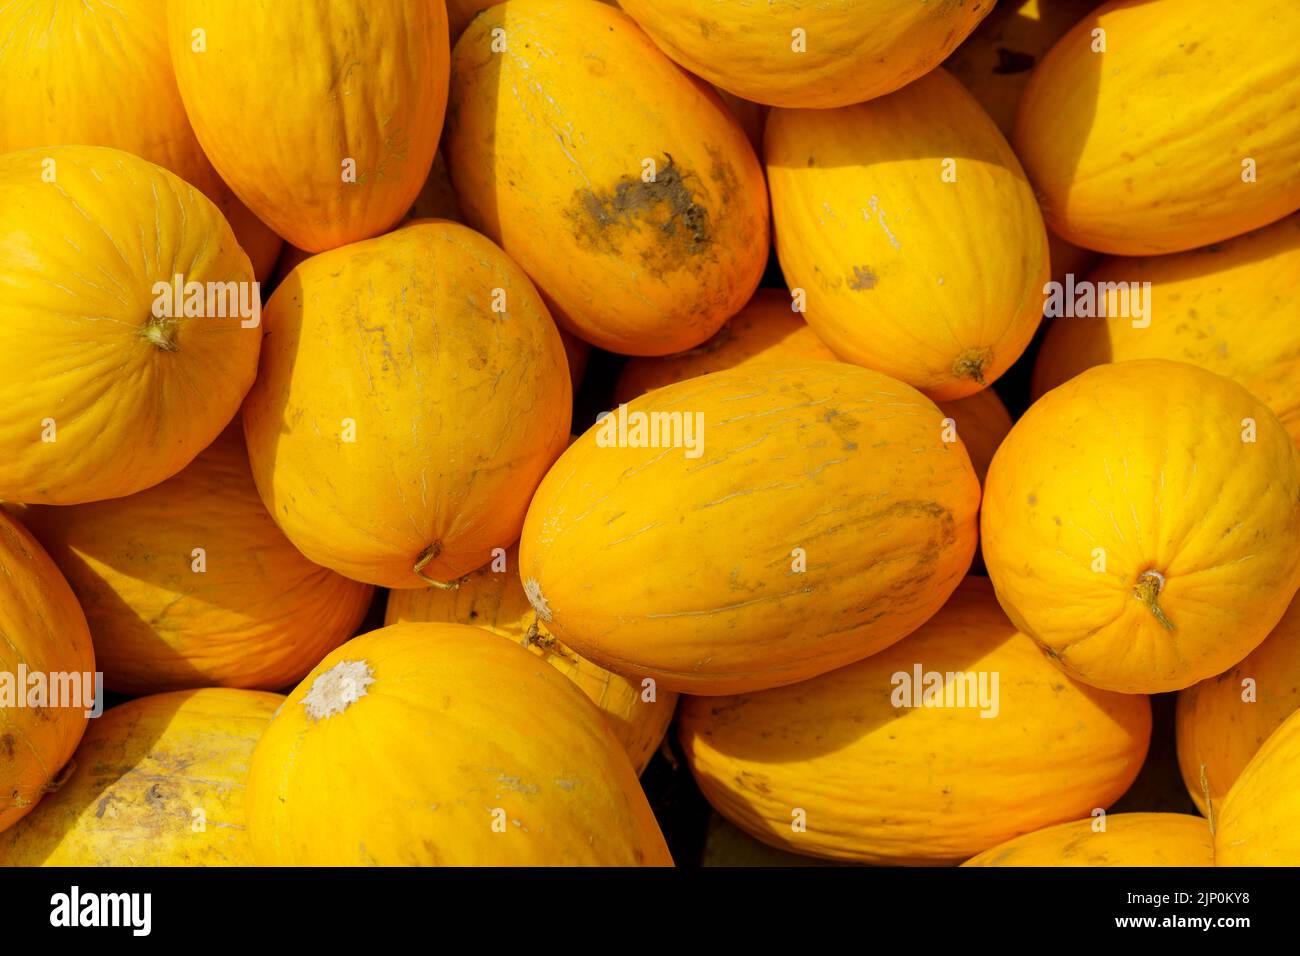 Natural background with lots of yellow melons Stock Photo